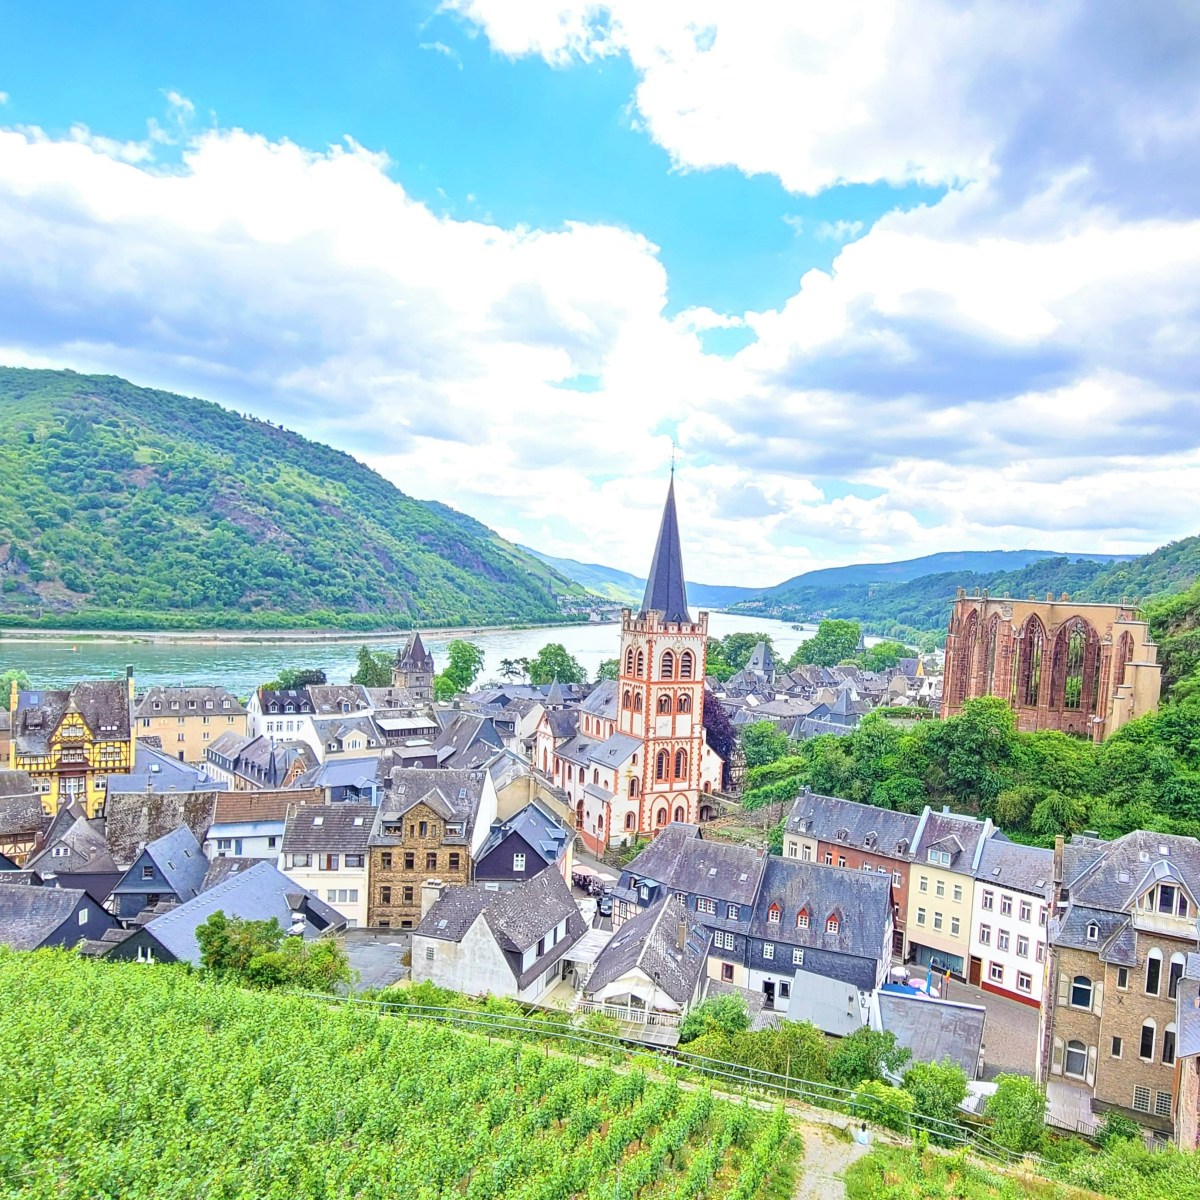 Top 10 Things to Do in Bacharach, Germany